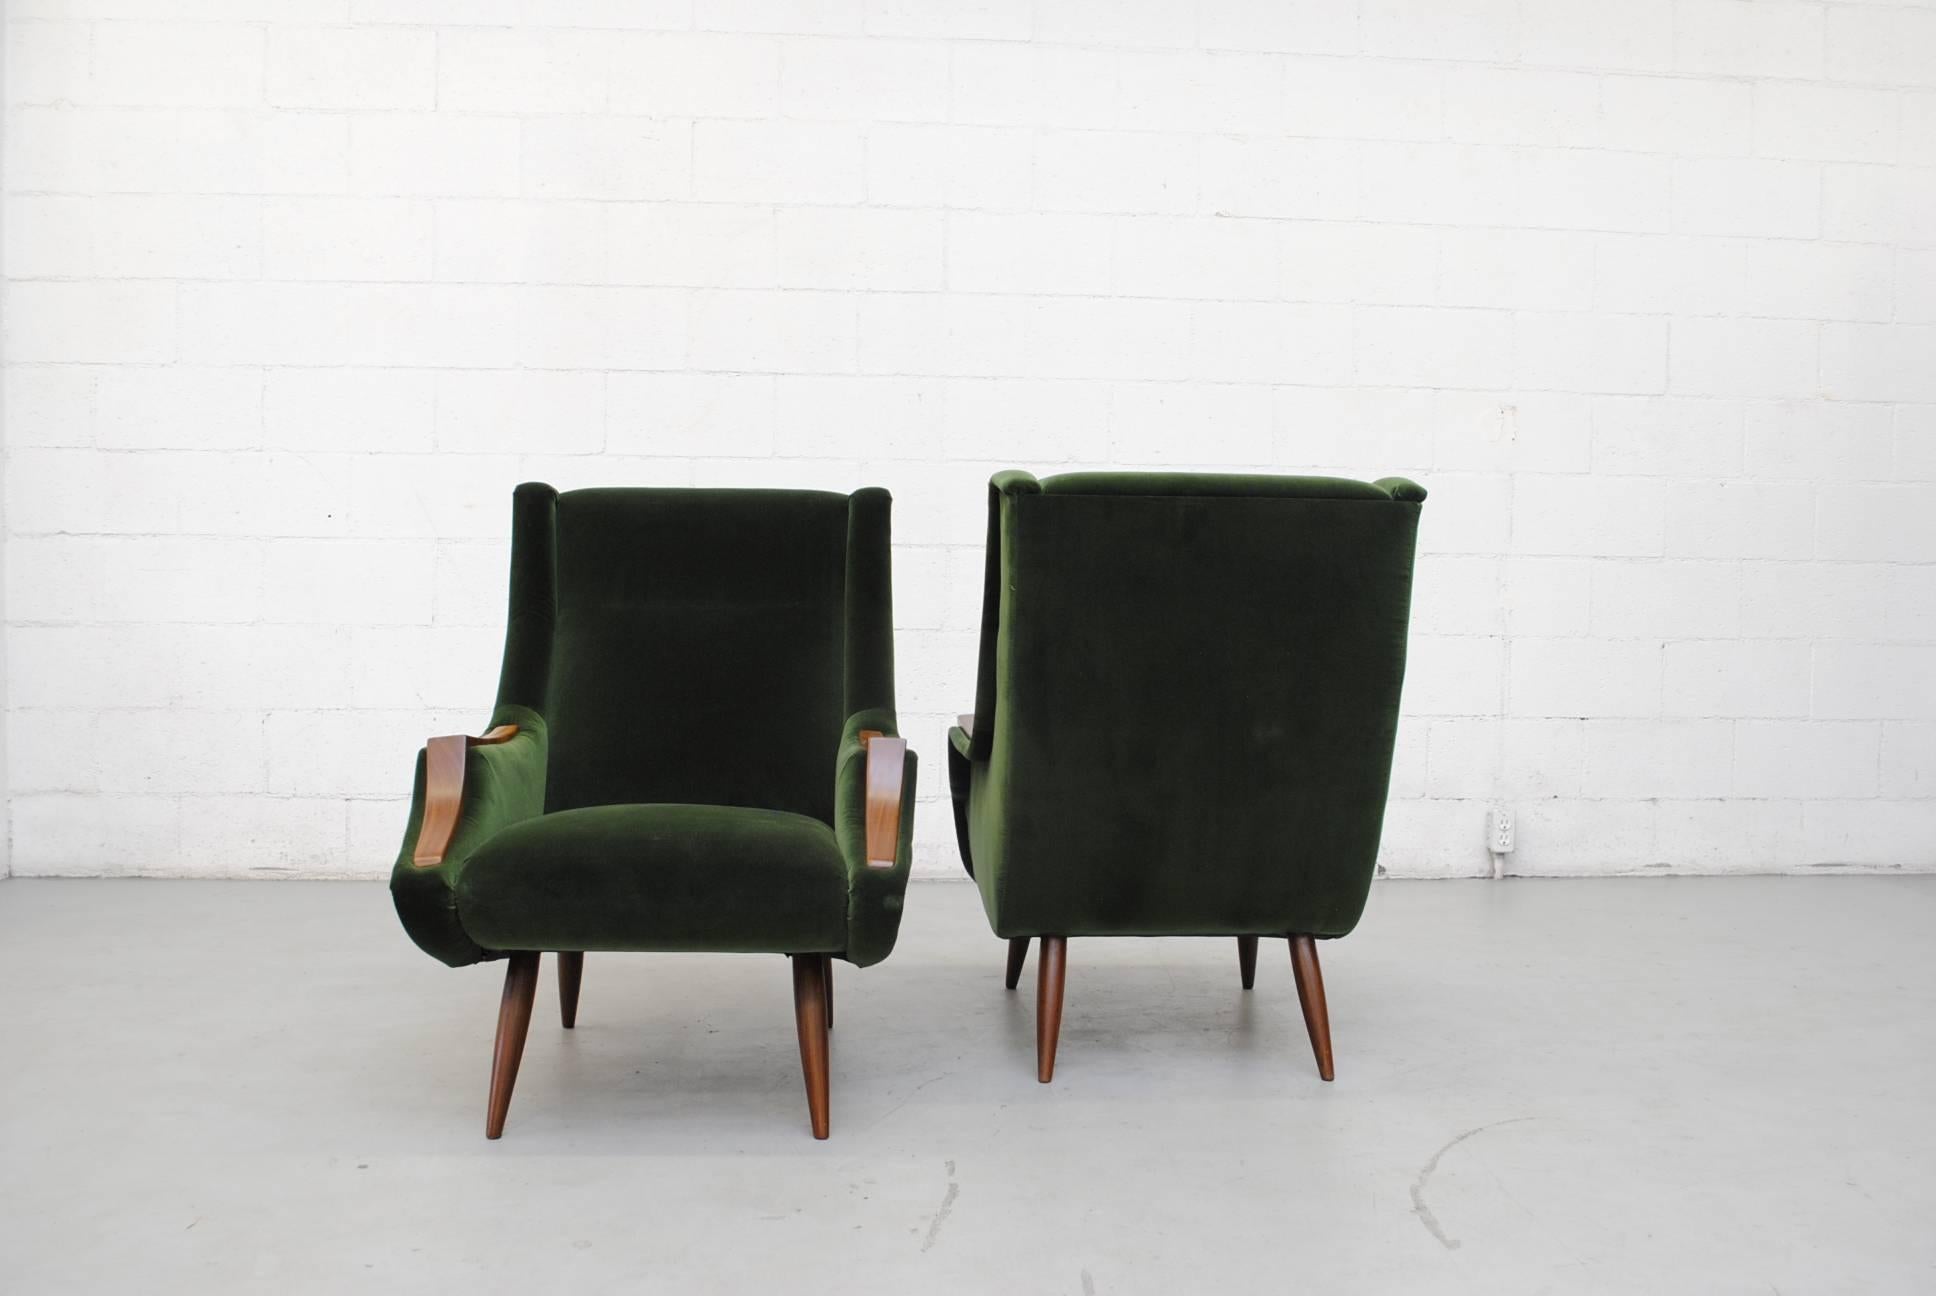 Set of two Marco Zanuso style lounge chairs newly upholstered in emerald green velvet with organic carved teak arm rests and legs, both lightly refinished. Set price.